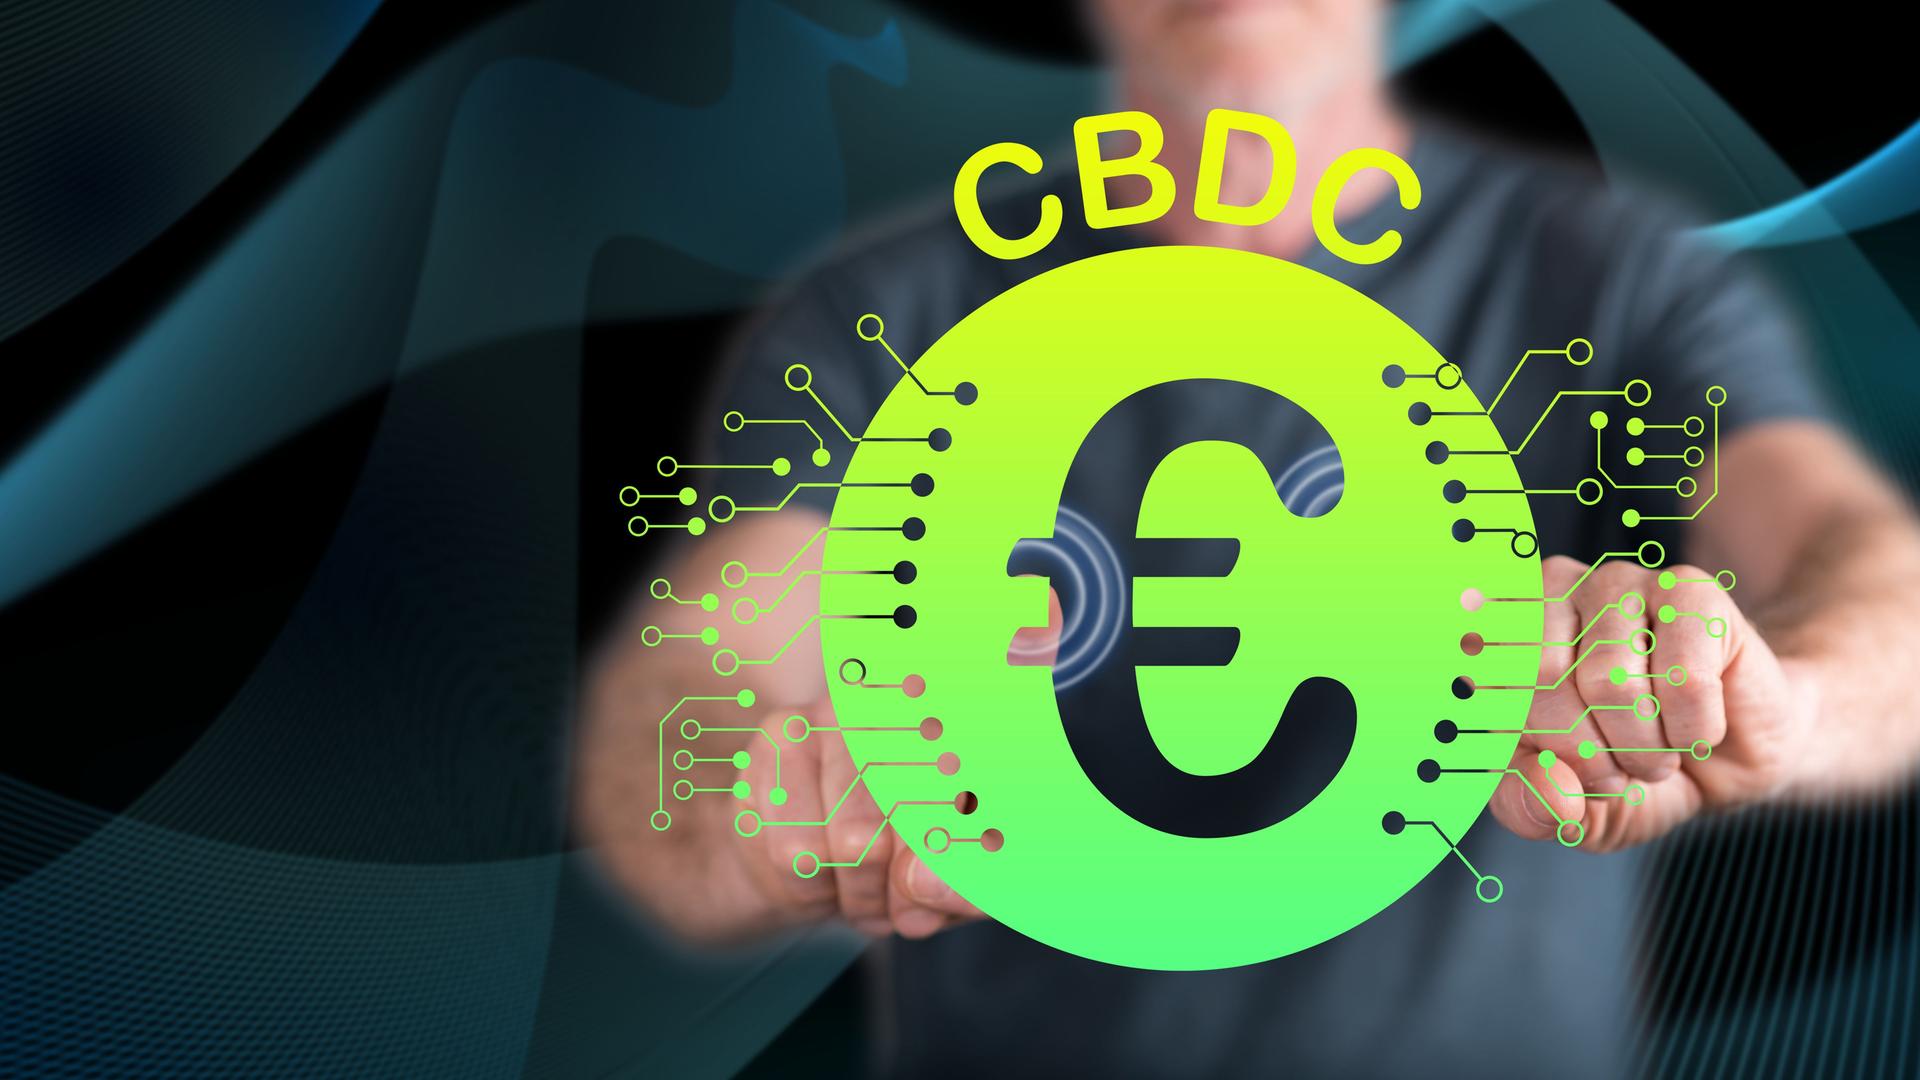 Man touching a cbdc (central bank digital currency) concept on a touch screen with his fingers Model Released Property Released xkwx cbdc central bank digital currency touch online screen finger business payment virtual pay banking finance economy global system transaction euro connection economic internet financial tech monetary person modern commerce cryptocurrency symbol digital currency blockchain exchange dollar money network yen concept photo